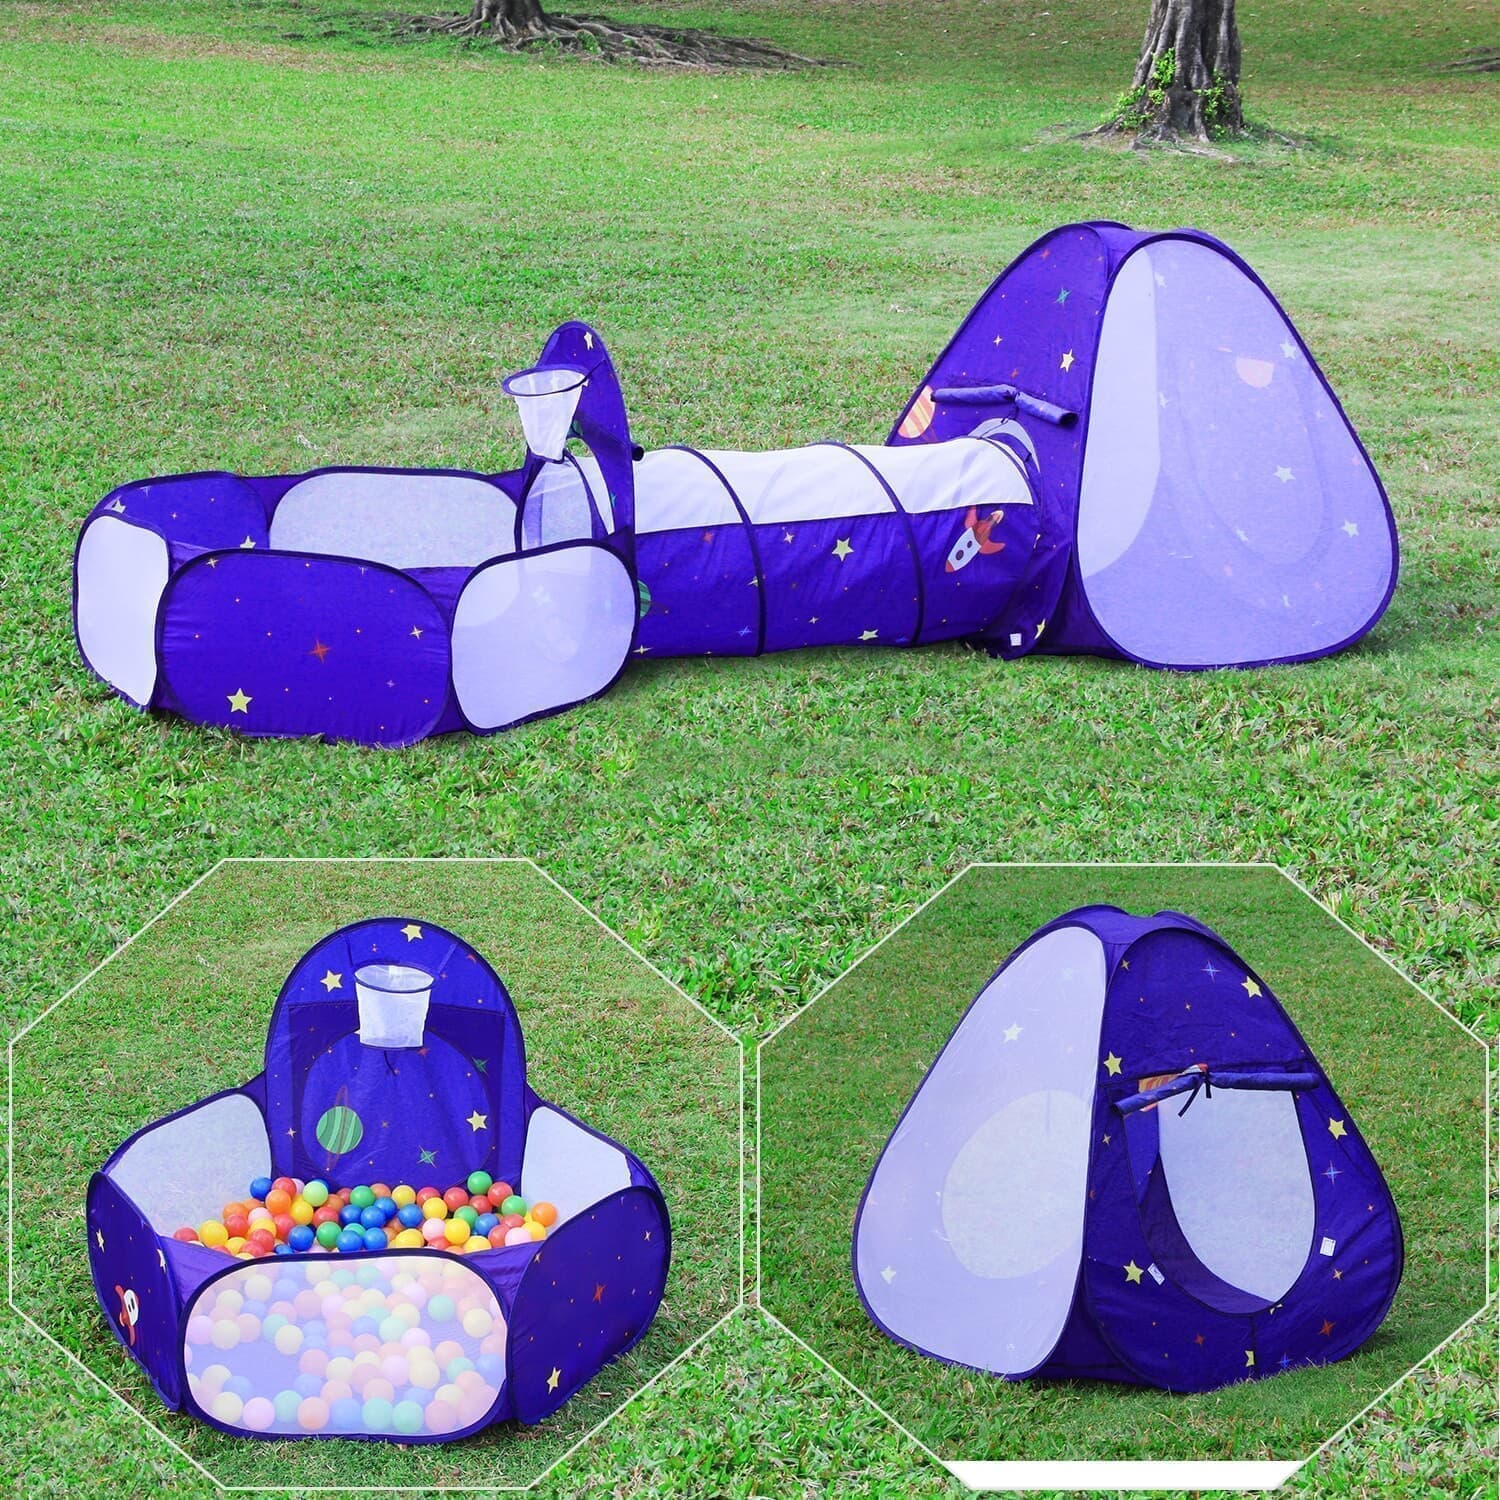 Homfu Kids Indoor And Outdoor Playhouse Princess Prince Castle Children Play Tent And Portable Toy Tent For Boys Girls  Homfu Kids Indoor And Outdoor Playhouse Princess Prince Castle Children Play Tent And Portable Toy Tent For Boys Girls Fun Plays Children Play Tent,kids play tent,outdoor indooor playhouse,3 in 1 pop up kids play tent